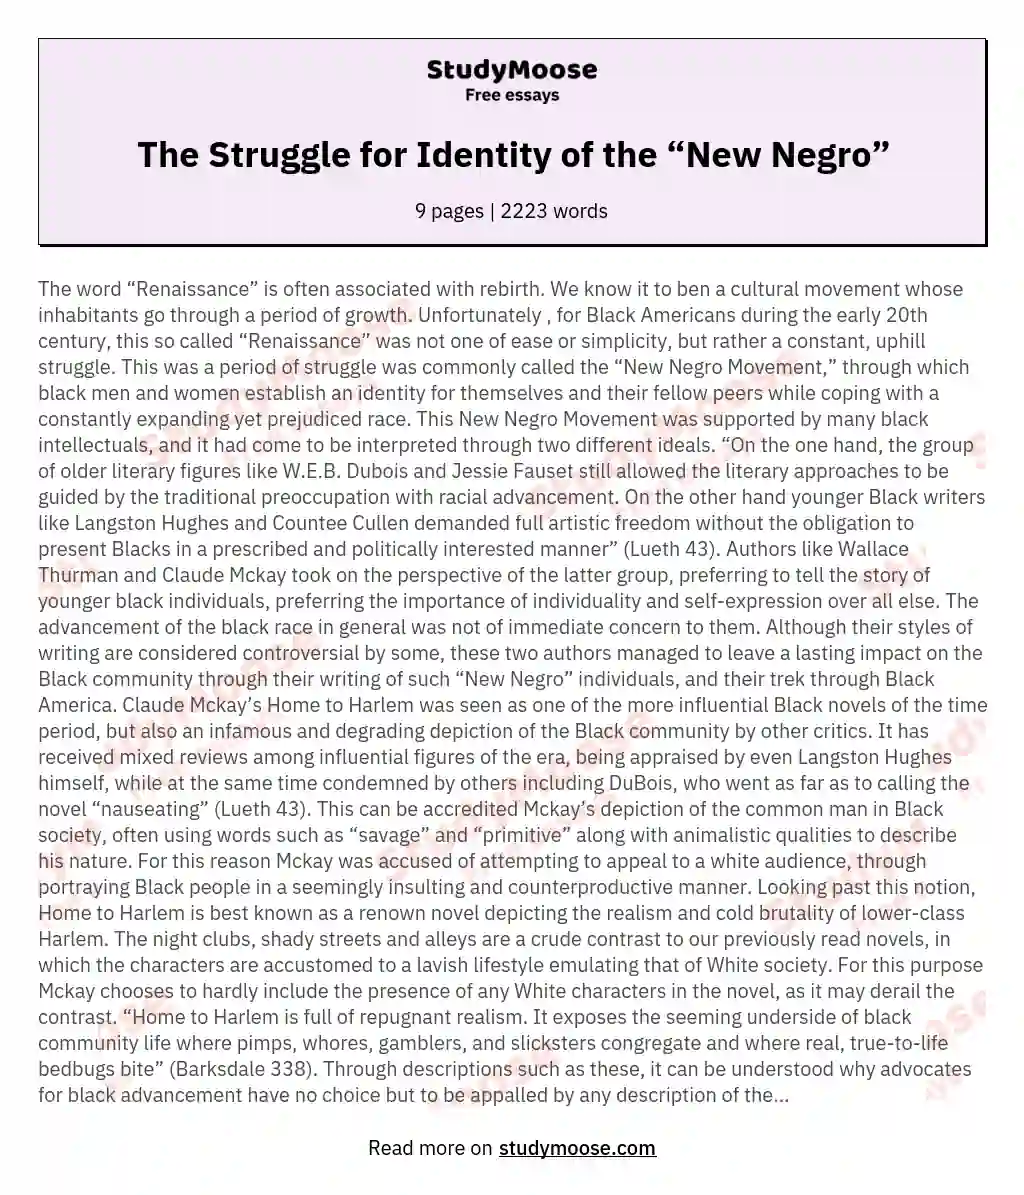 The Struggle for Identity of the “New Negro” essay